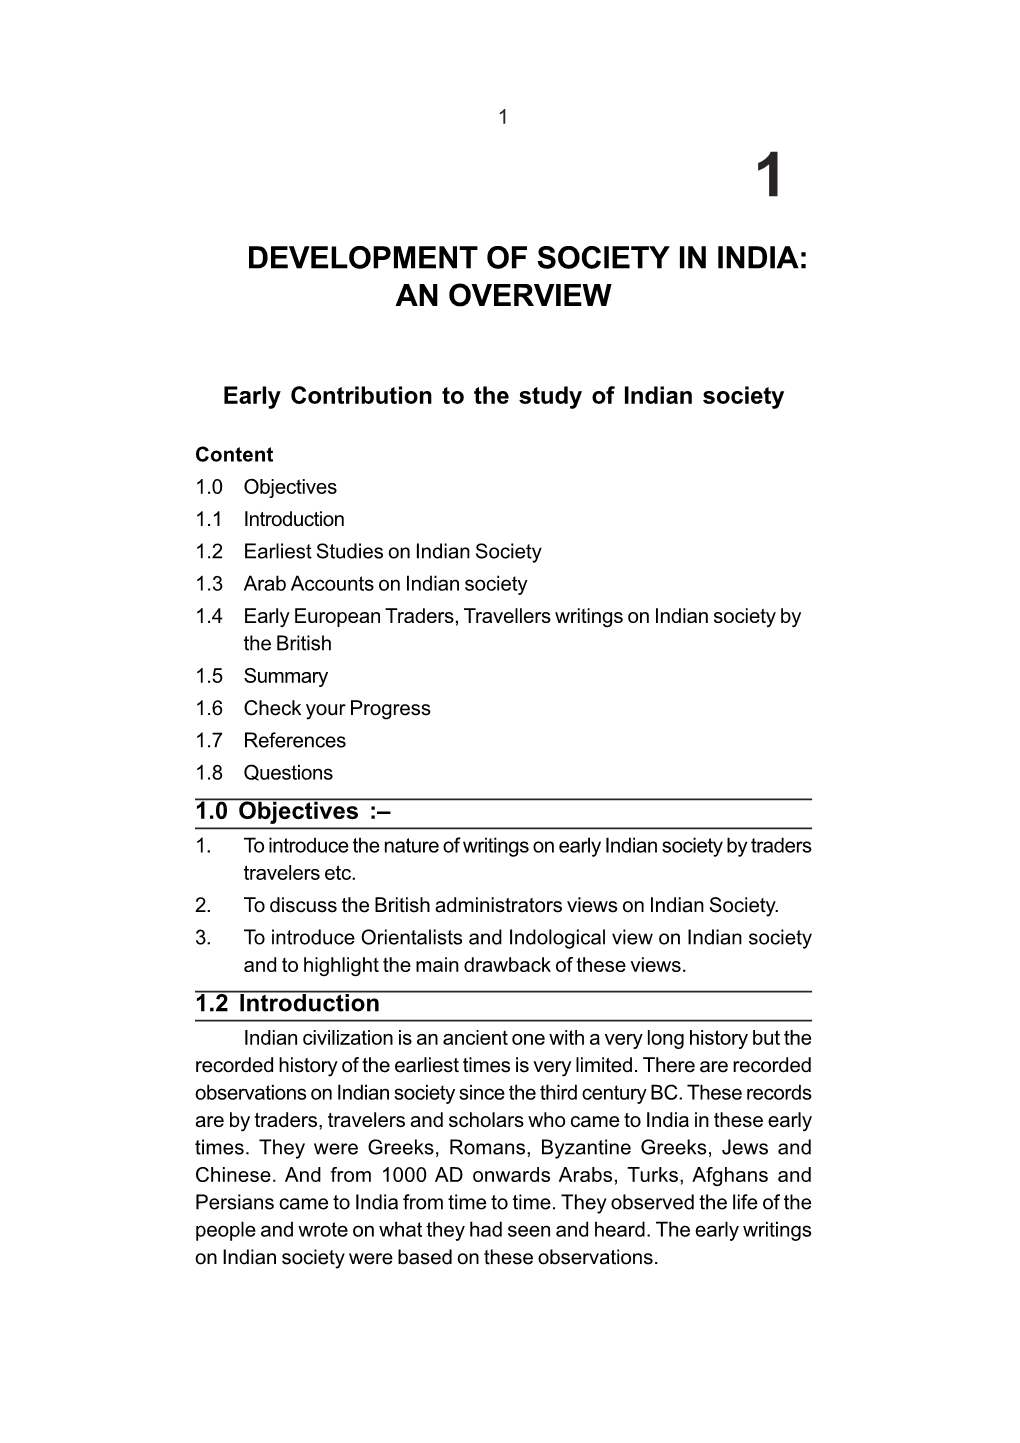 Early Contribution to the Study of Indian Society